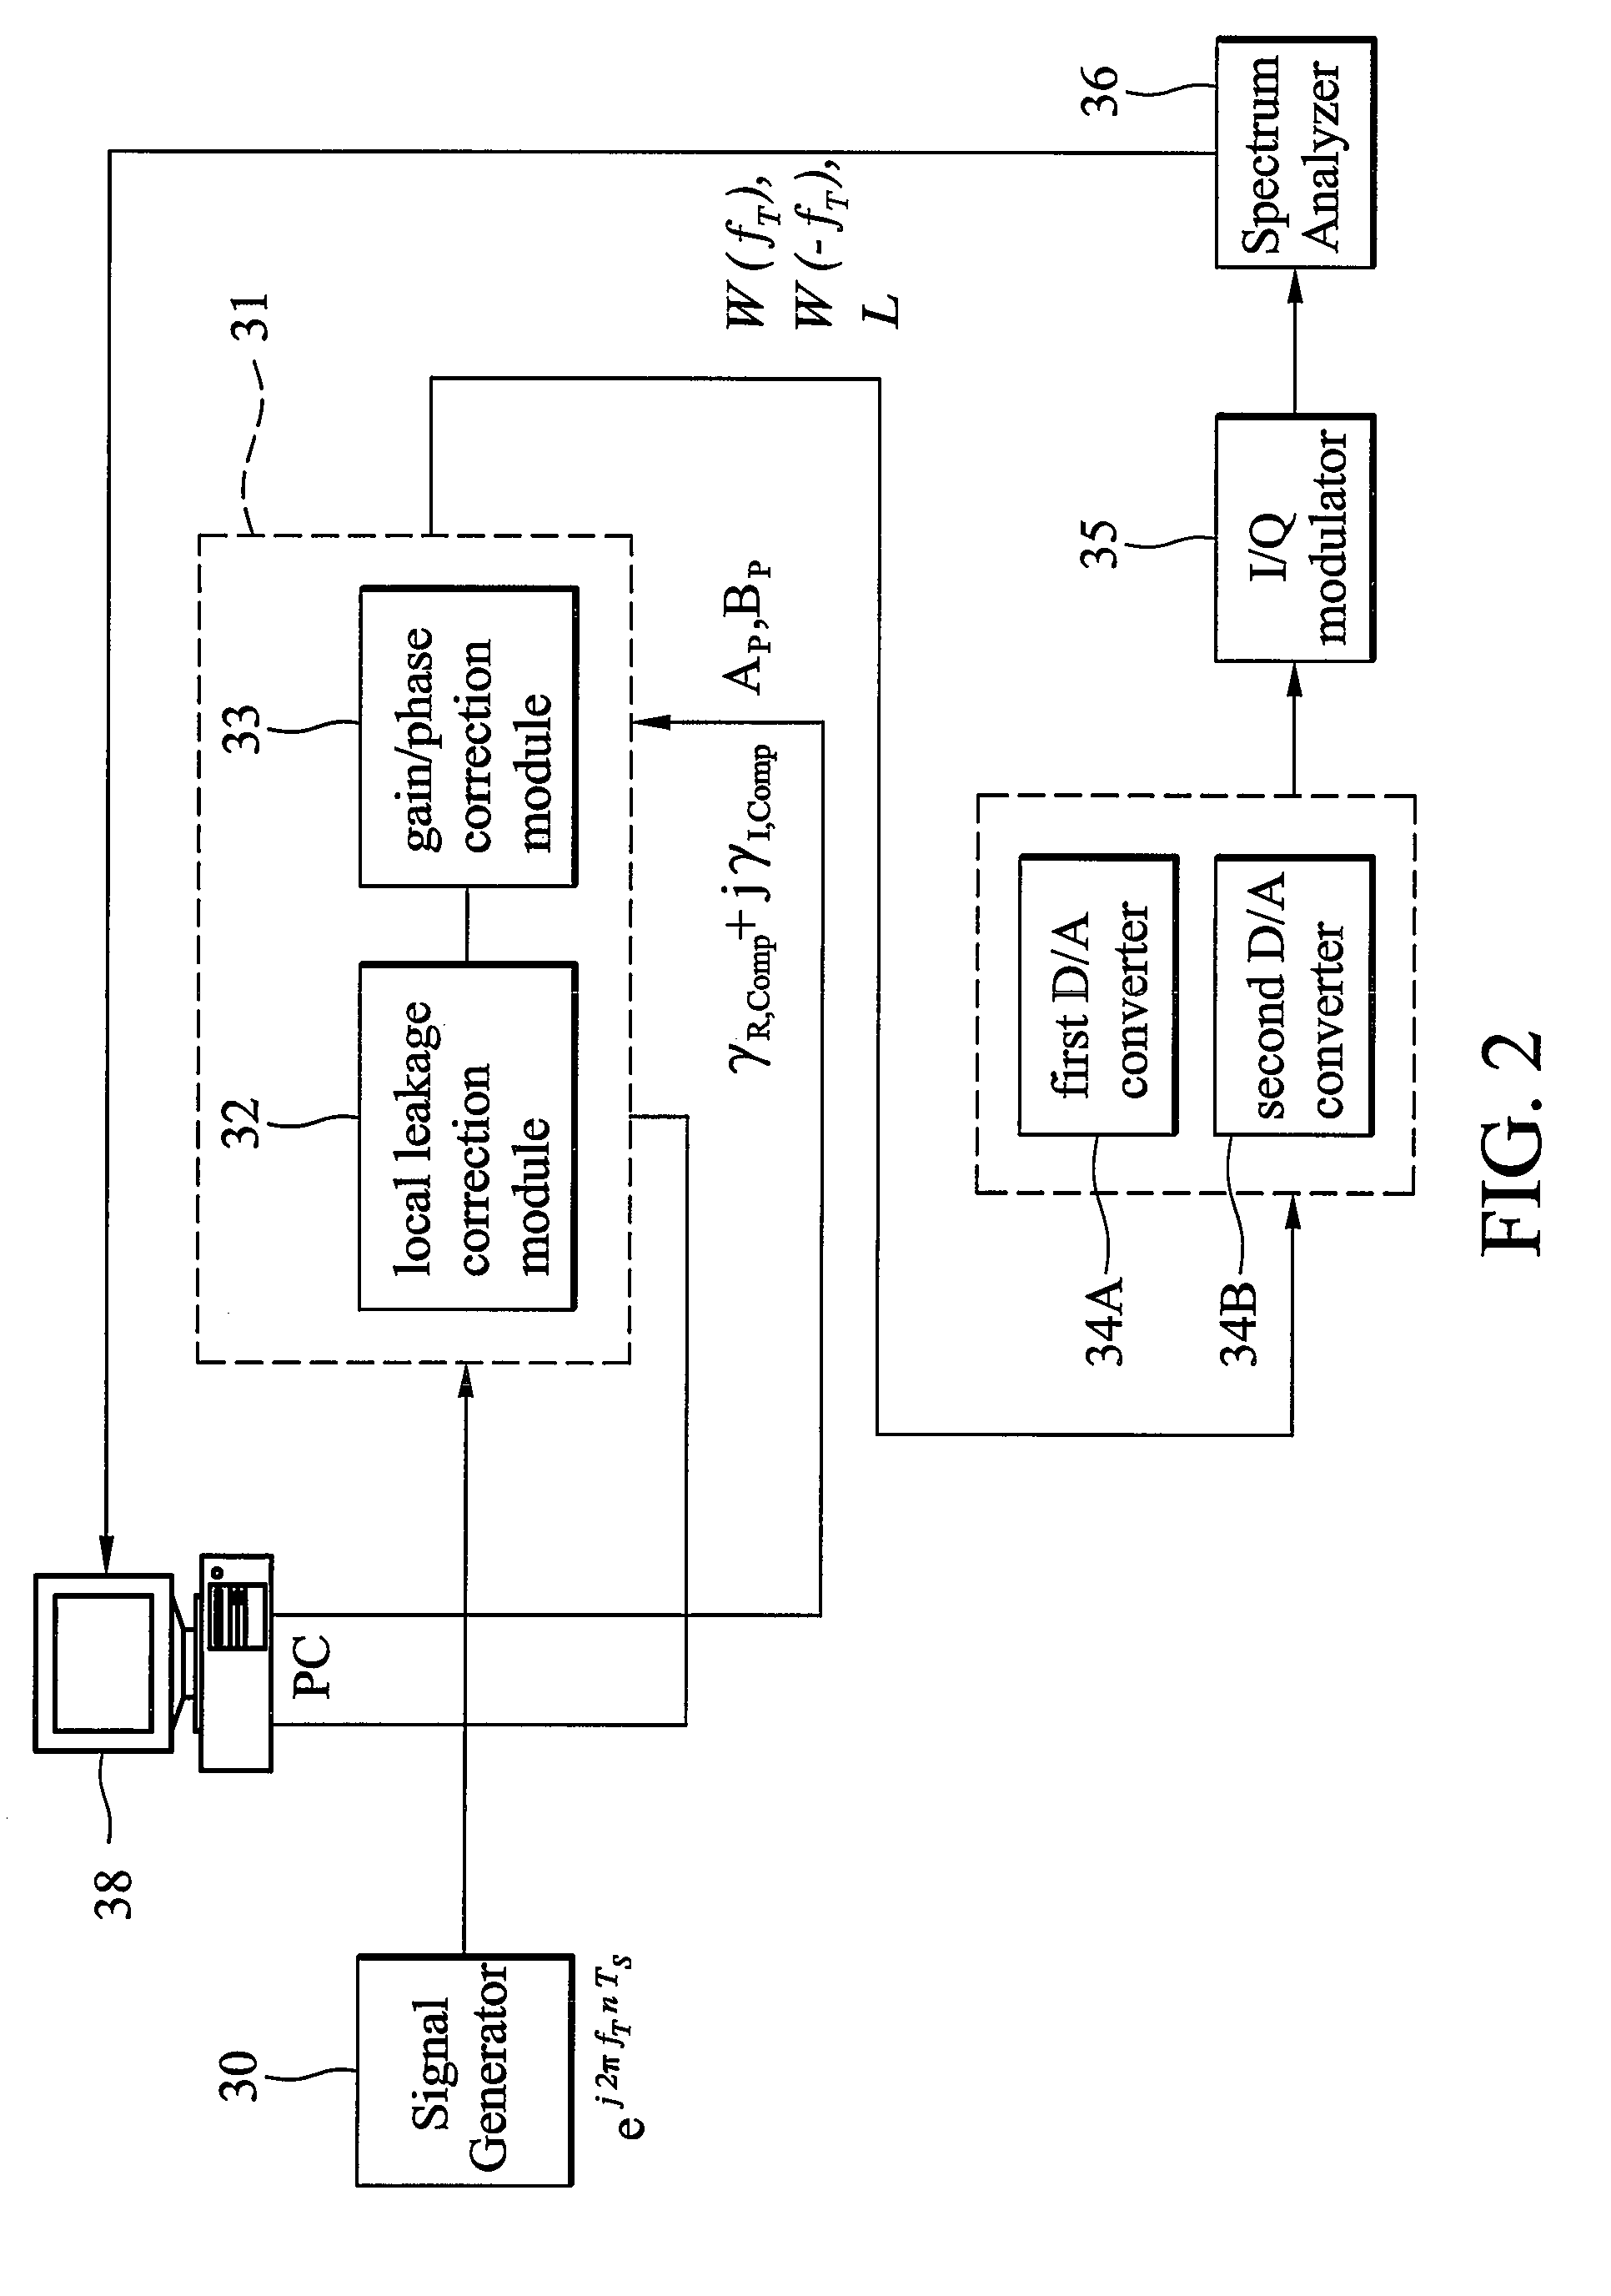 Method and apparatus for I/Q mismatch calibration of transmitter